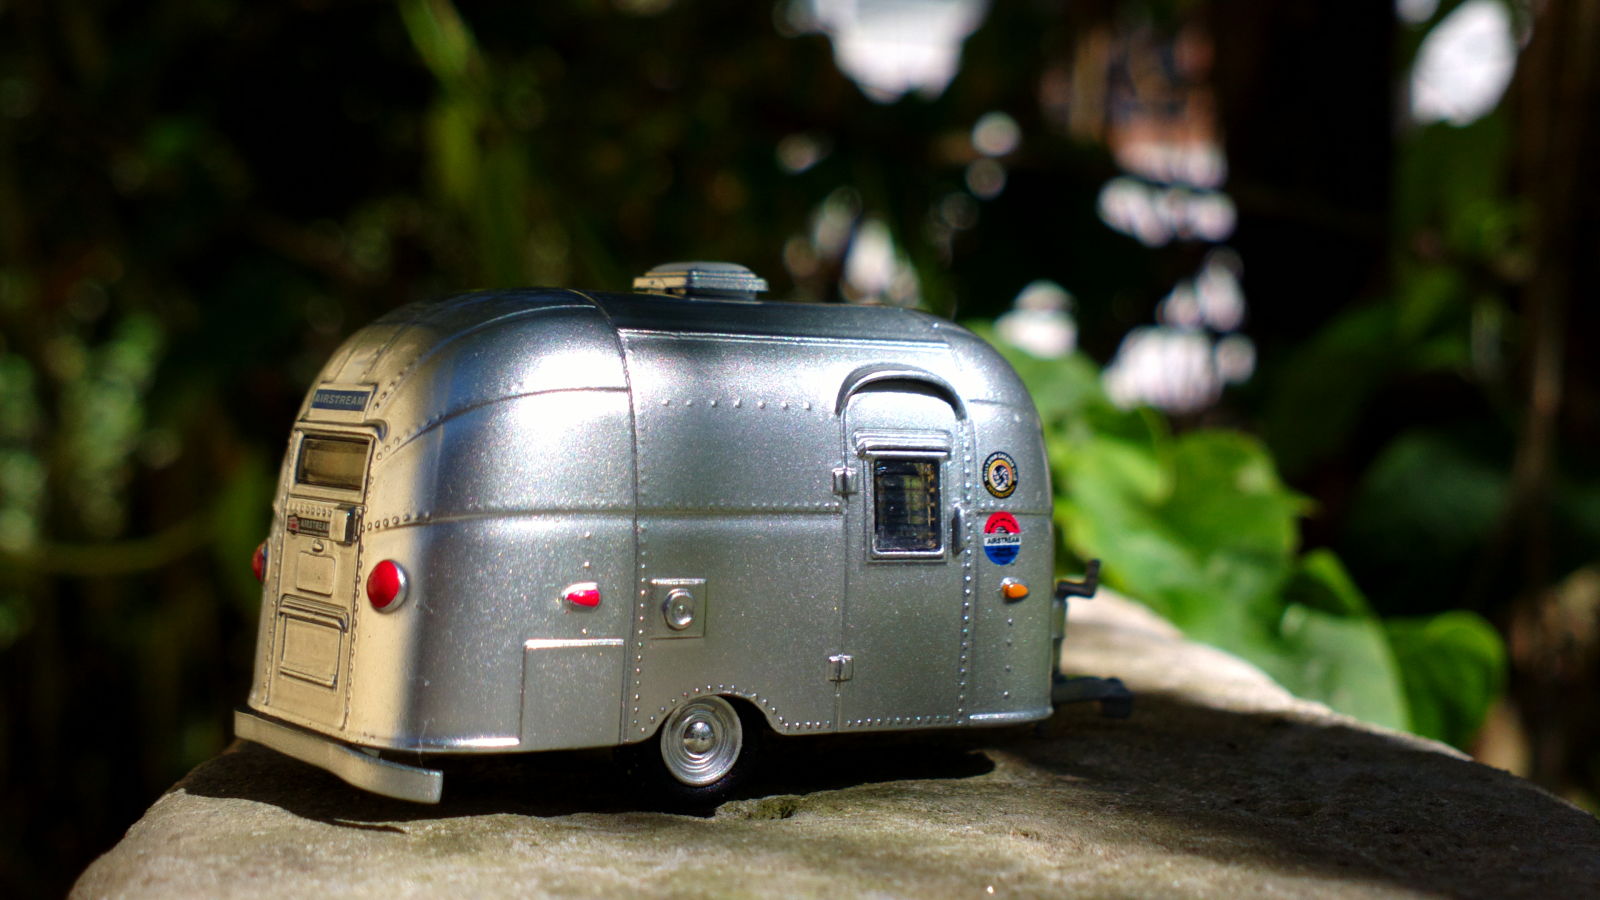 Illustration for article titled Weekend? Lets hitch the Airstream and go!